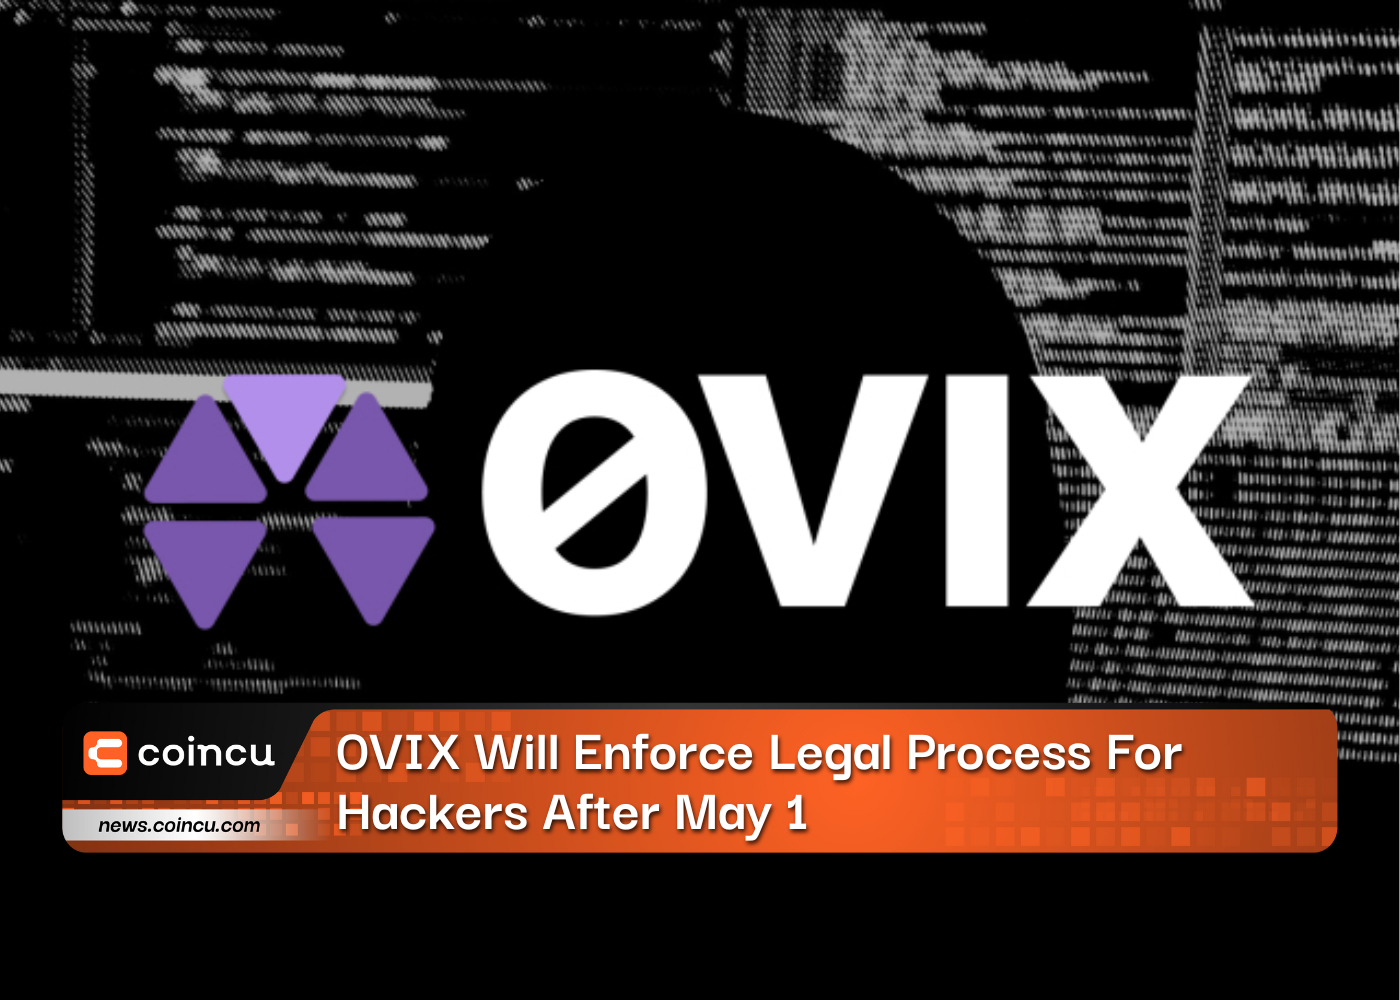 0VIX Will Enforce Legal Process For Hackers After May 1